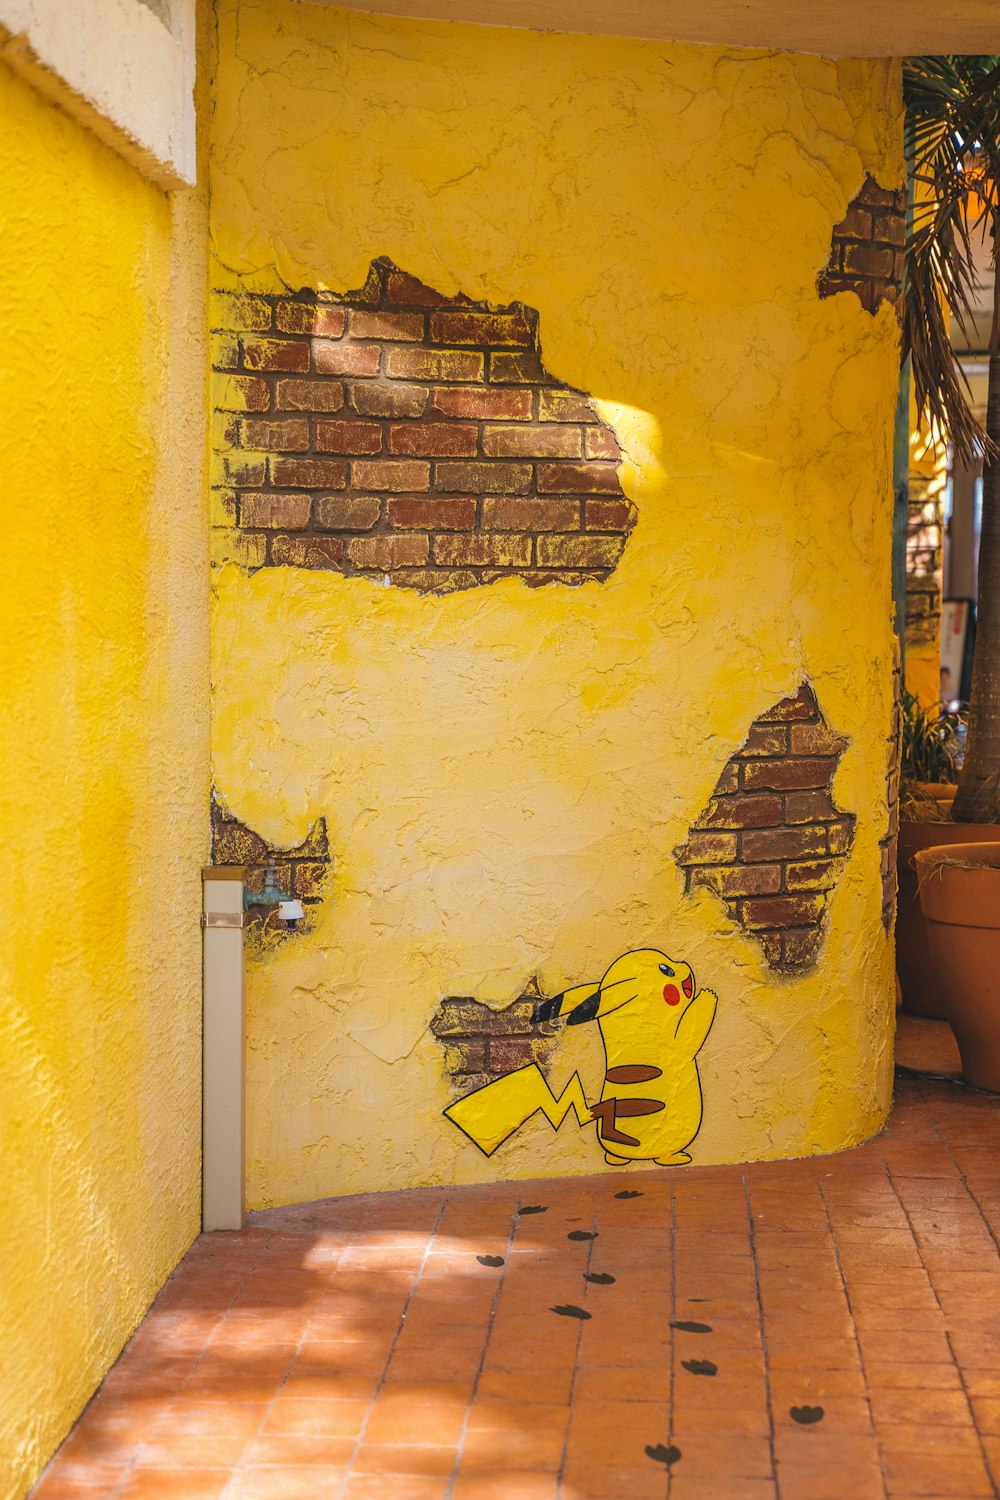 a yellow wall with a cartoon character painted on it